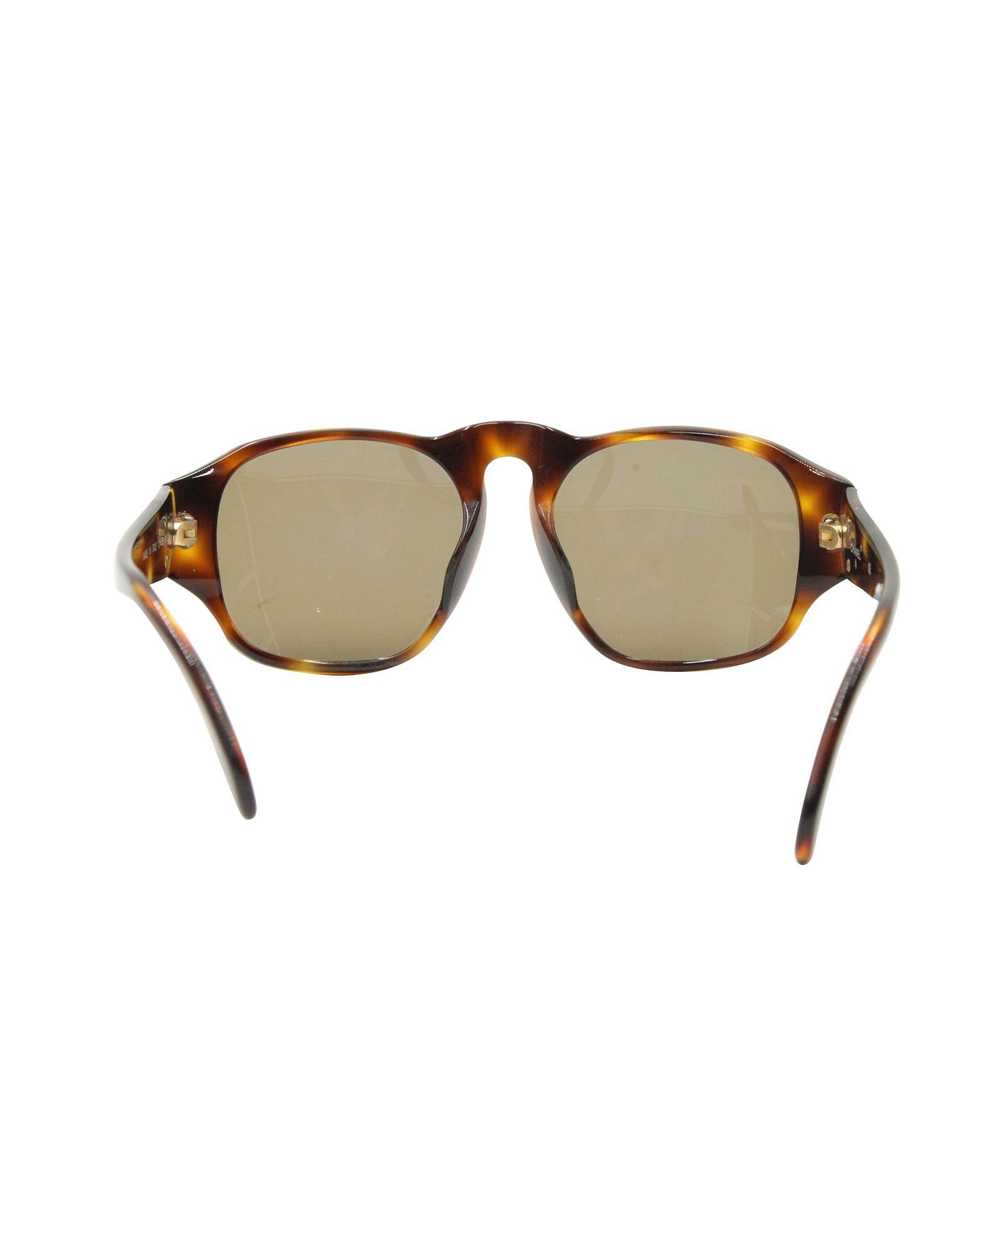 Product Details Chanel Tortoise Shell Sunglasses - image 6